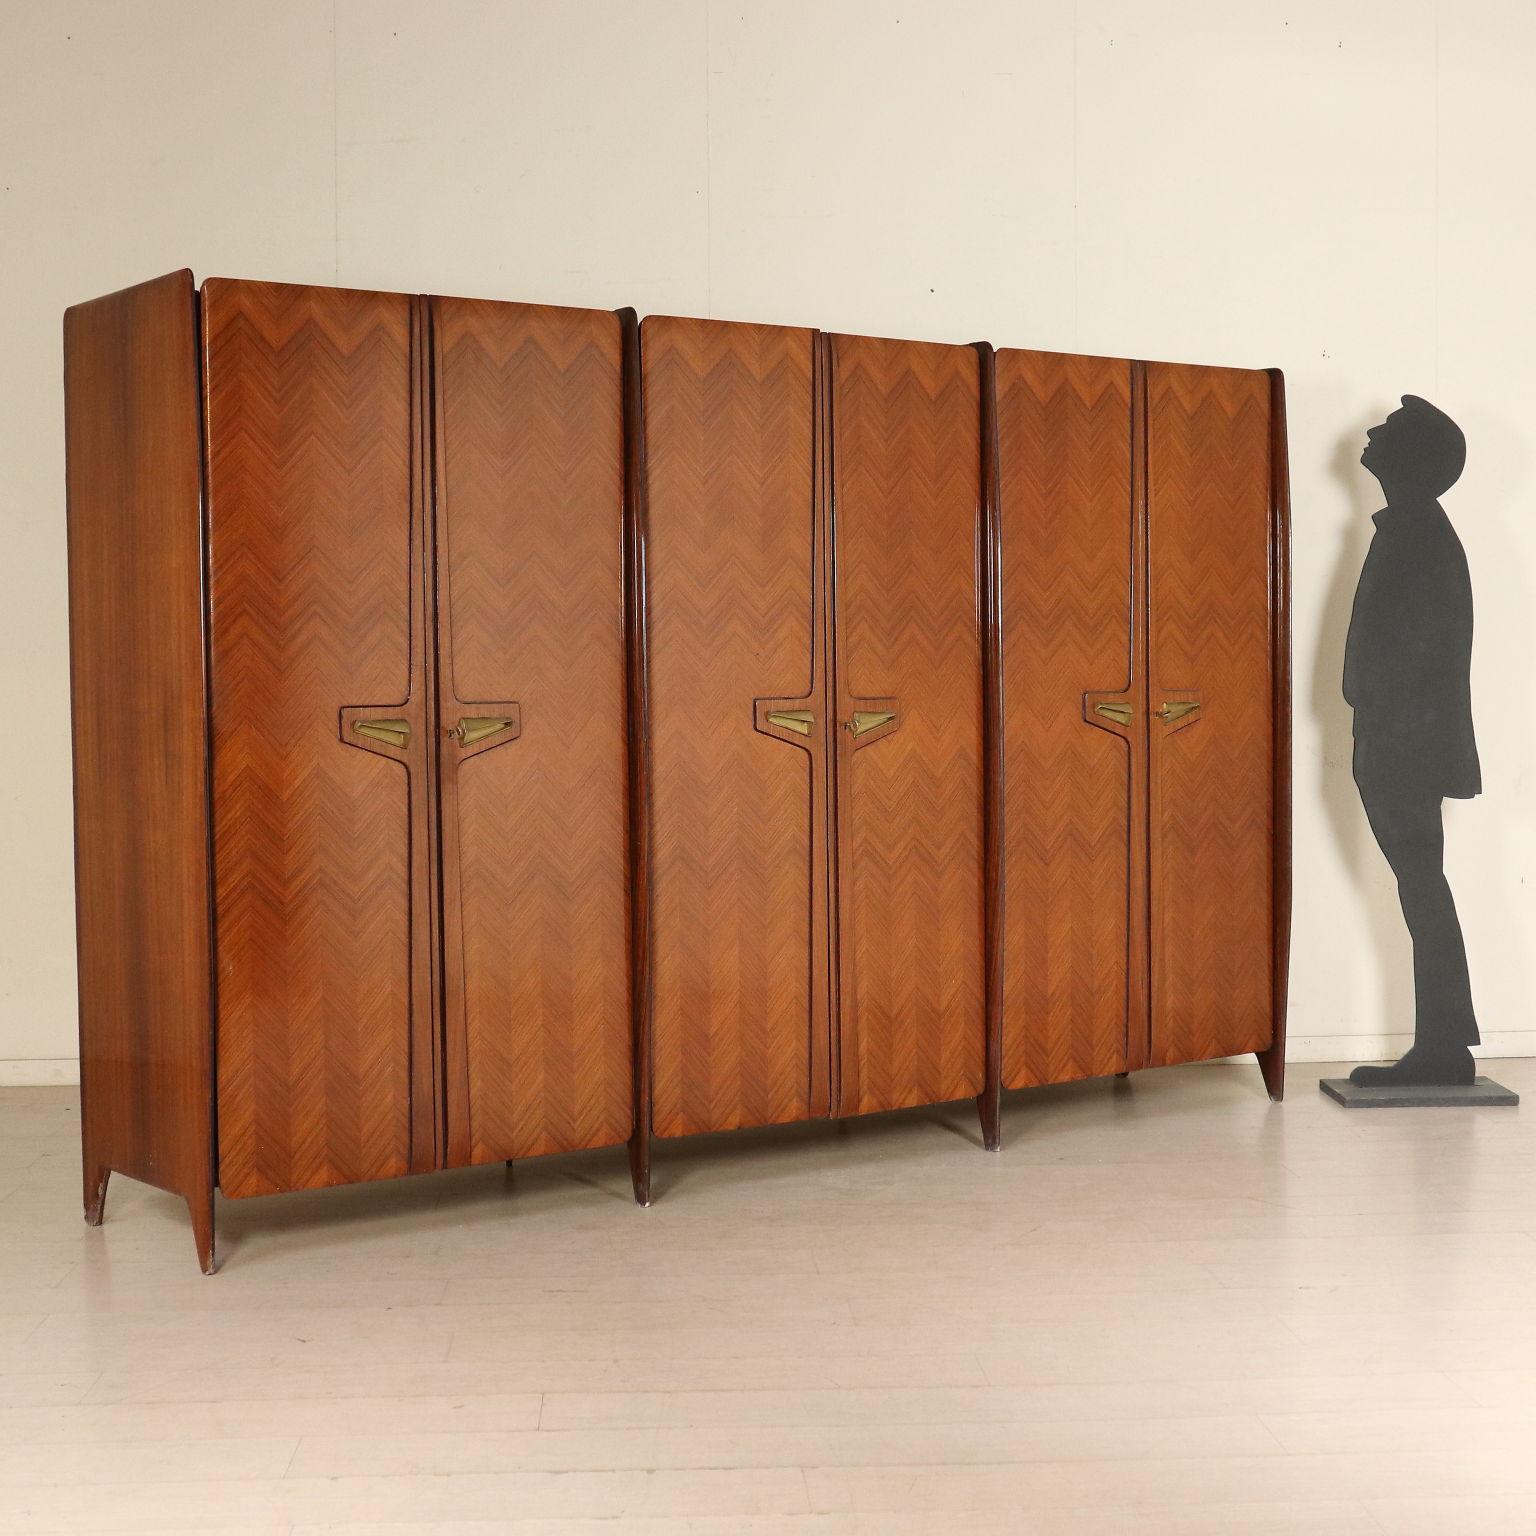 A wardrobe, wood, brass handles. Manufactured in Italy, 1950s-1960s.